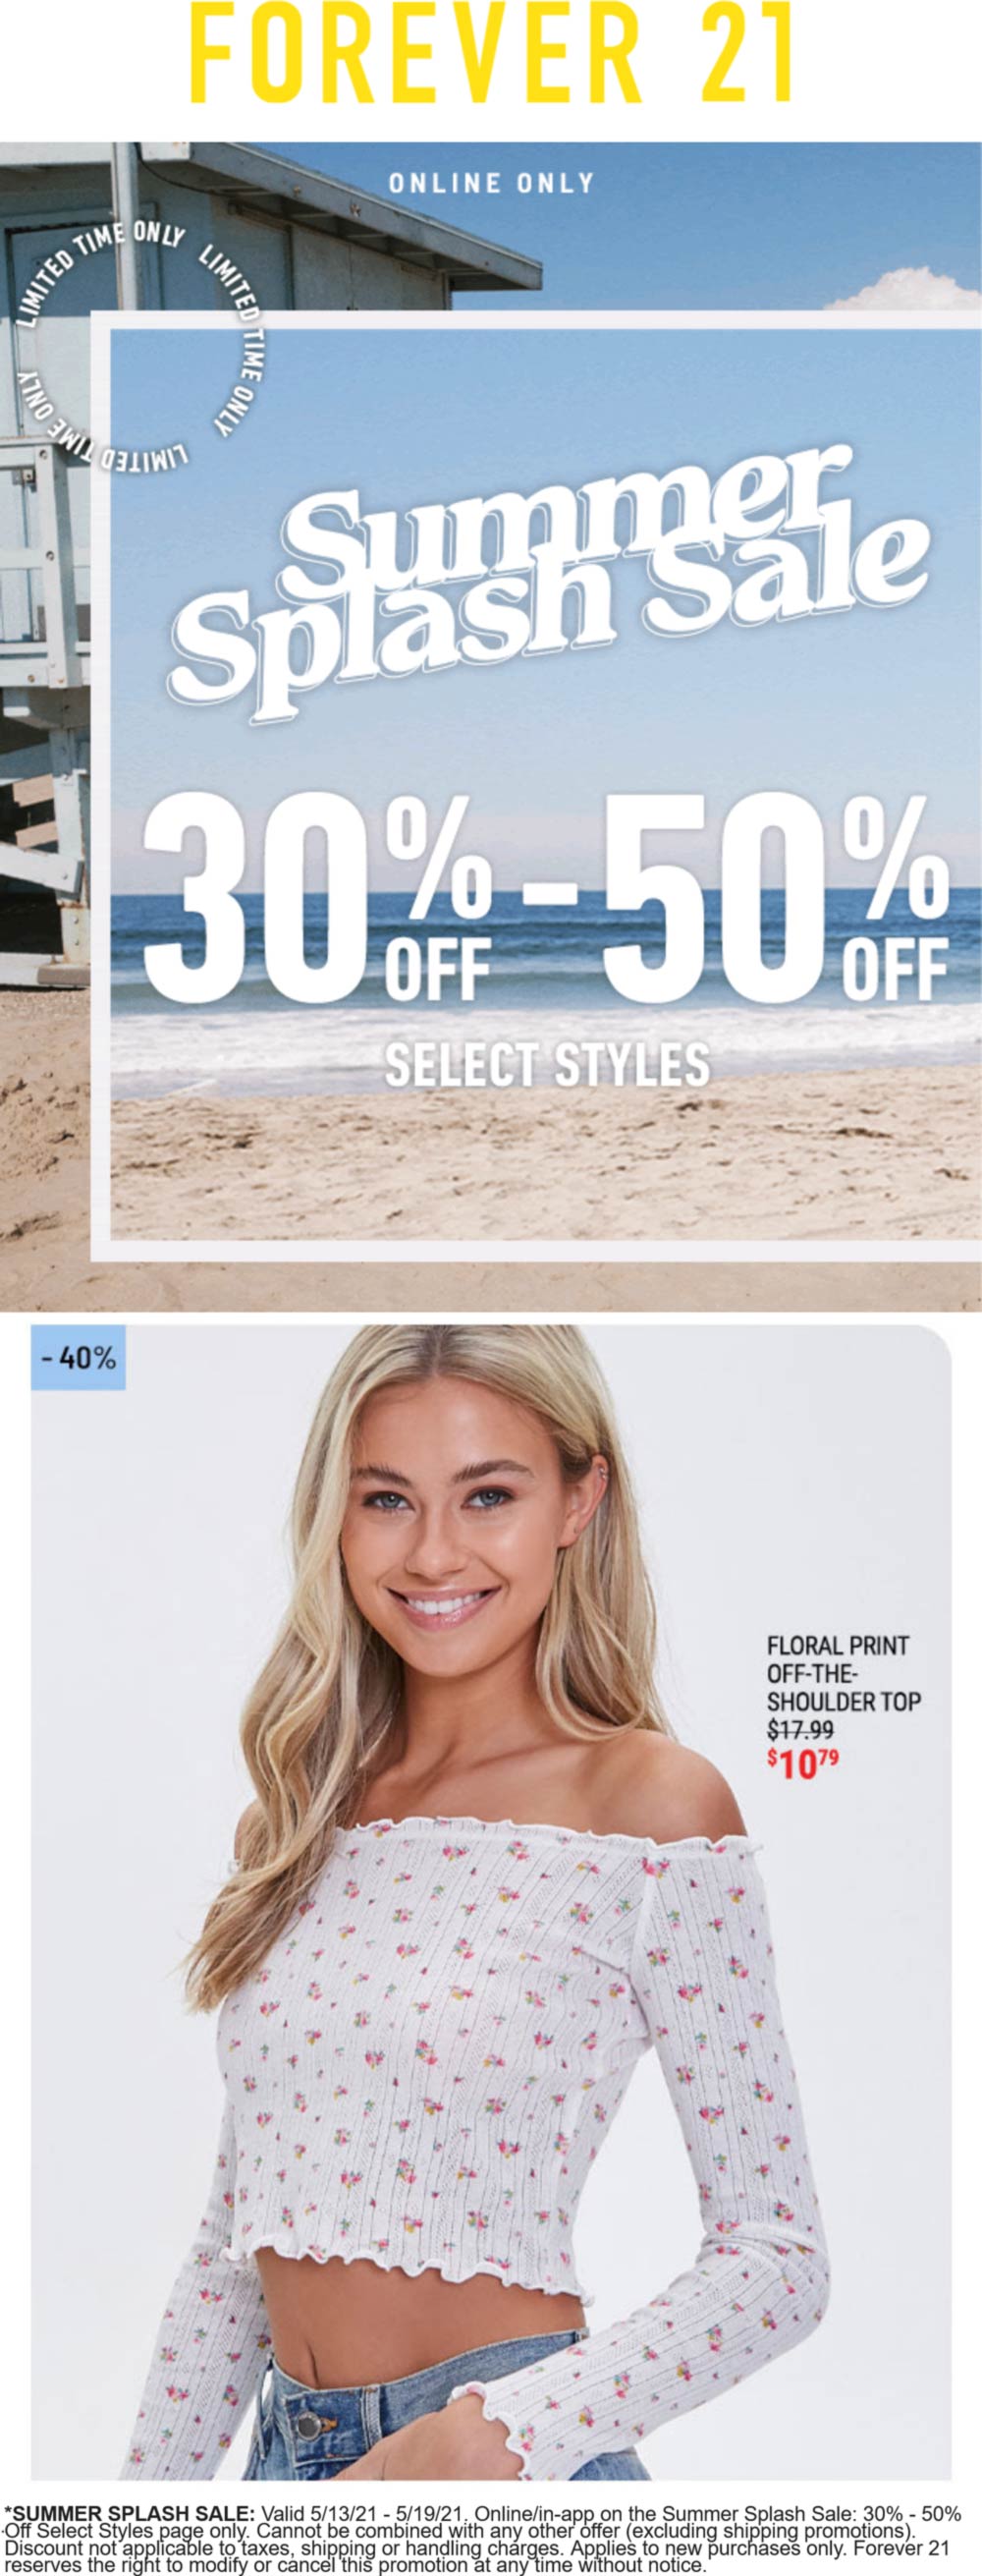 Forever 21 stores Coupon  30-50% off Summer online at Forever 21 #forever21 